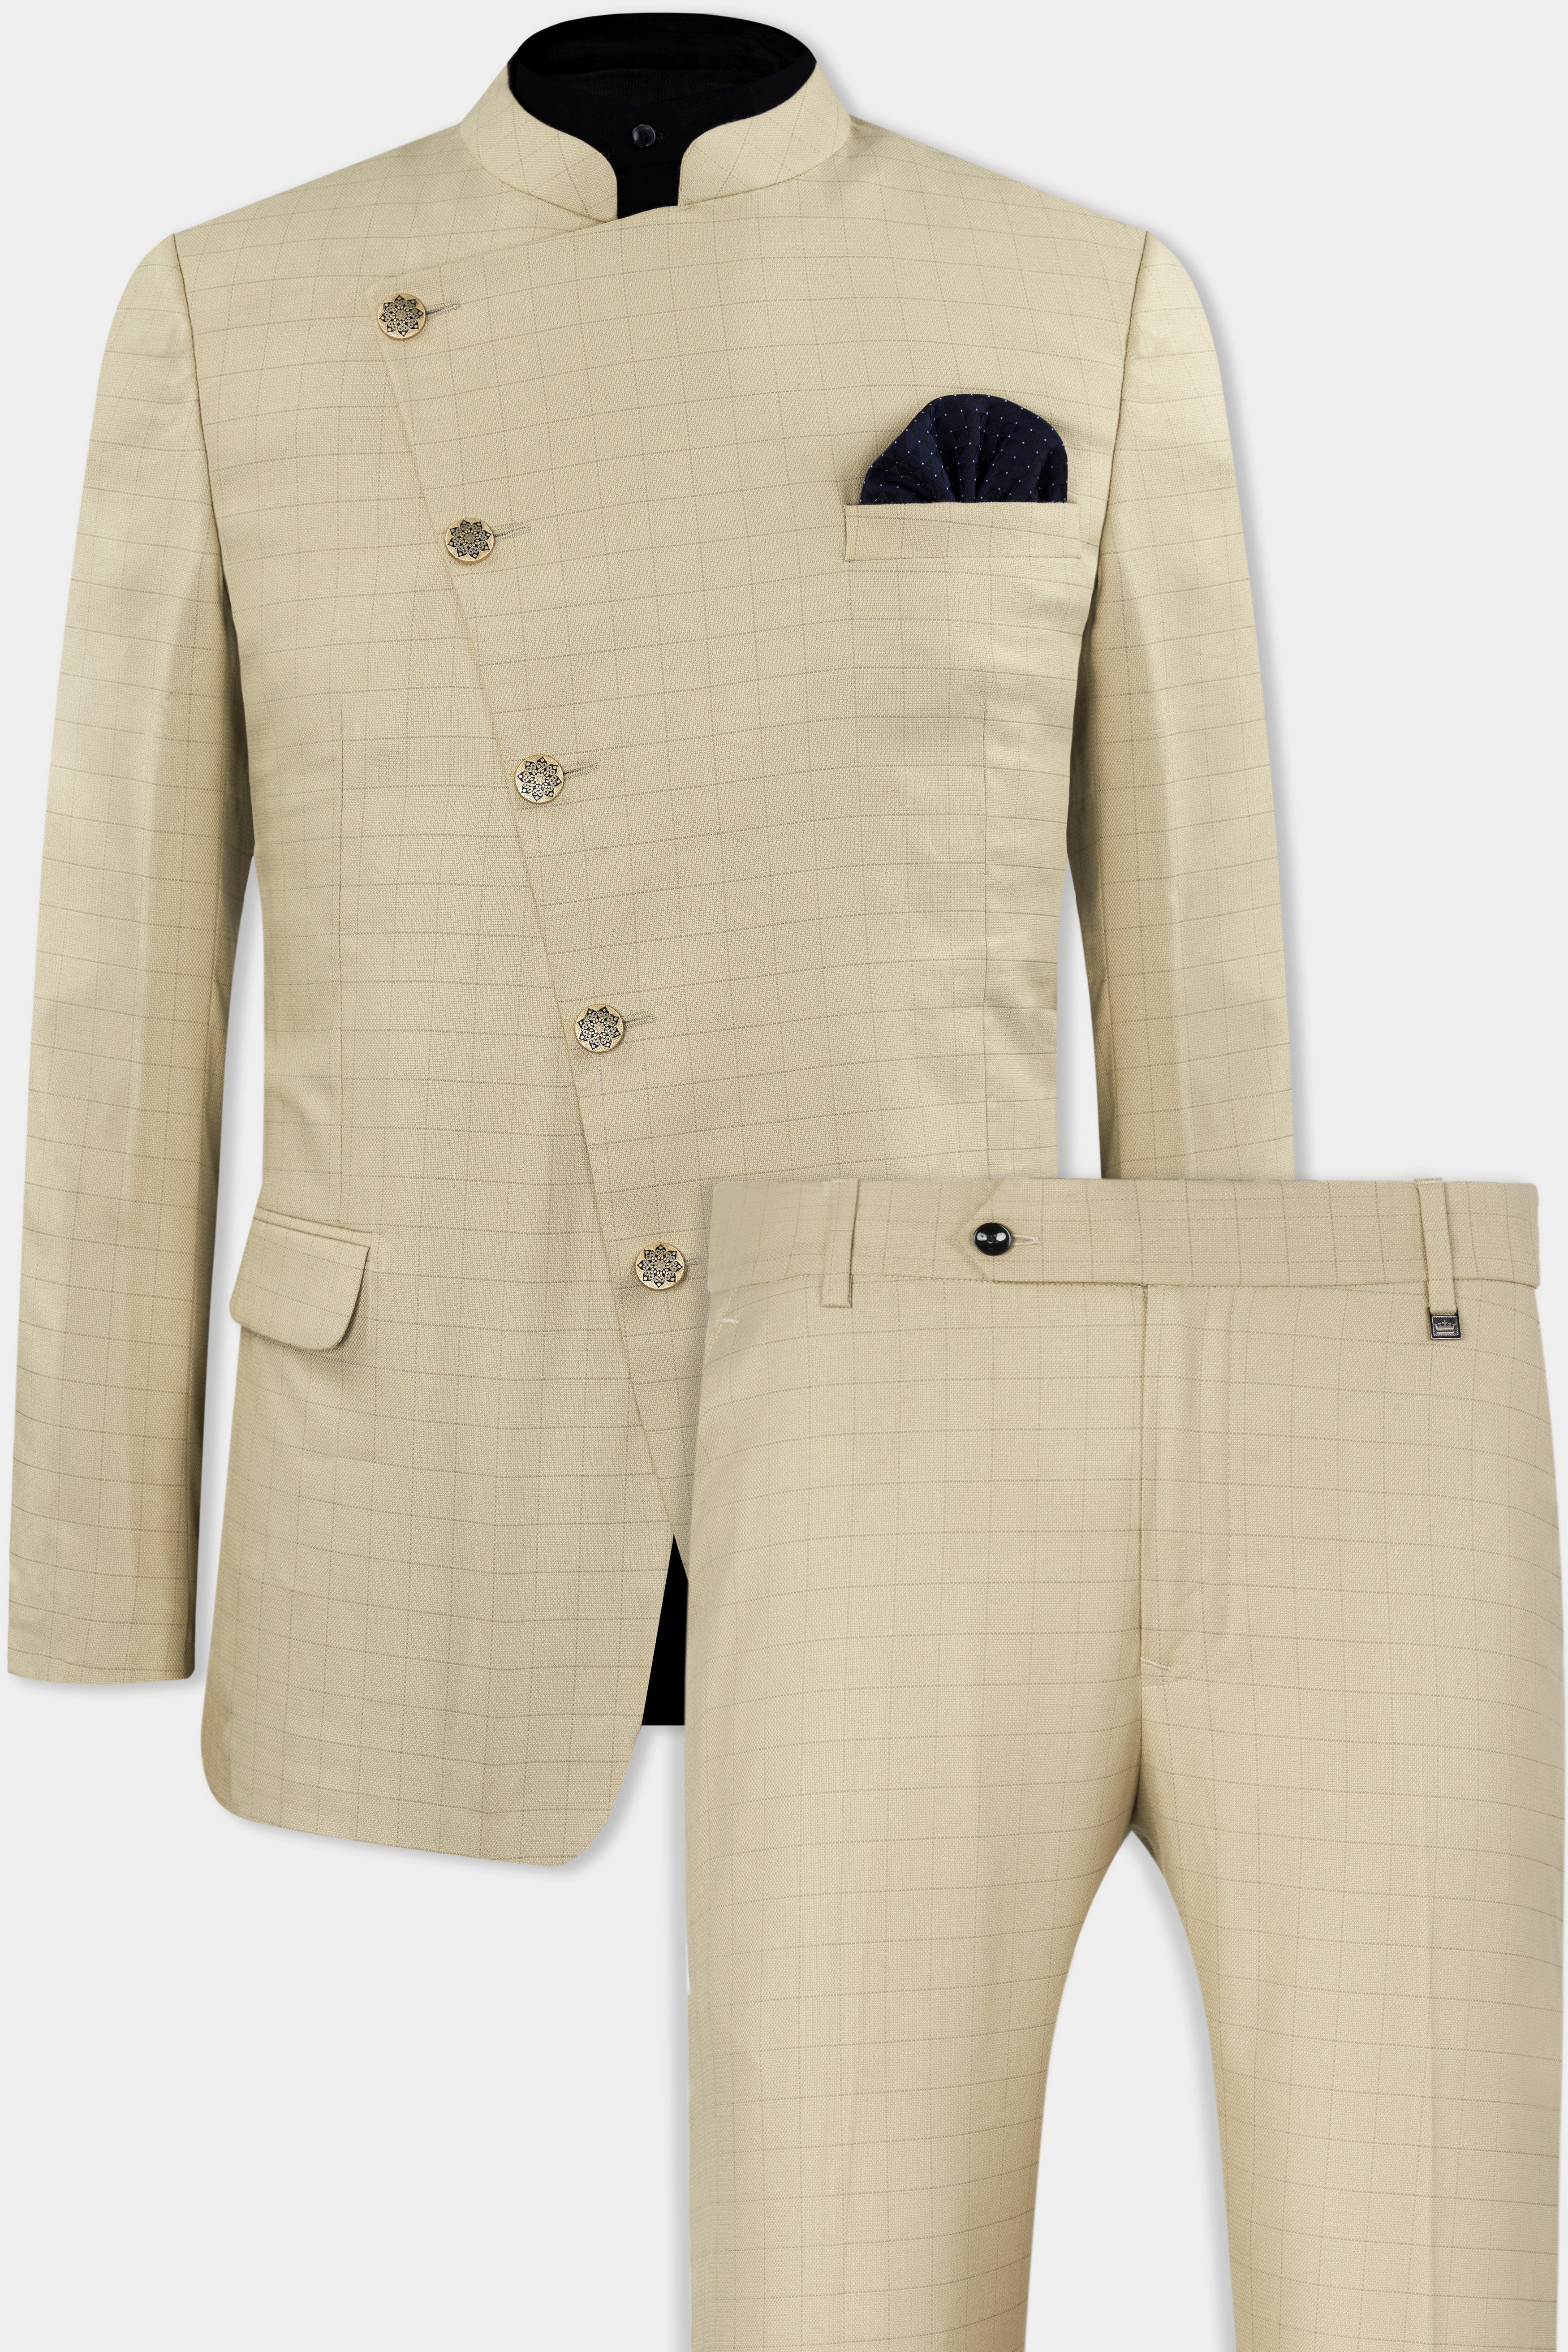 Pavlova Brown with Taupe Brown Checkered Dobby Wool Rich Cross Buttoned Bandhgala Suit ST2878-CBG-36,ST2878-CBG-38,ST2878-CBG-40,ST2878-CBG-42,ST2878-CBG-44,ST2878-CBG-46,ST2878-CBG-48,ST2878-CBG-50,ST2878-CBG-52,ST2878-CBG-54,ST2878-CBG-56,ST2878-CBG-58,ST2878-CBG-60